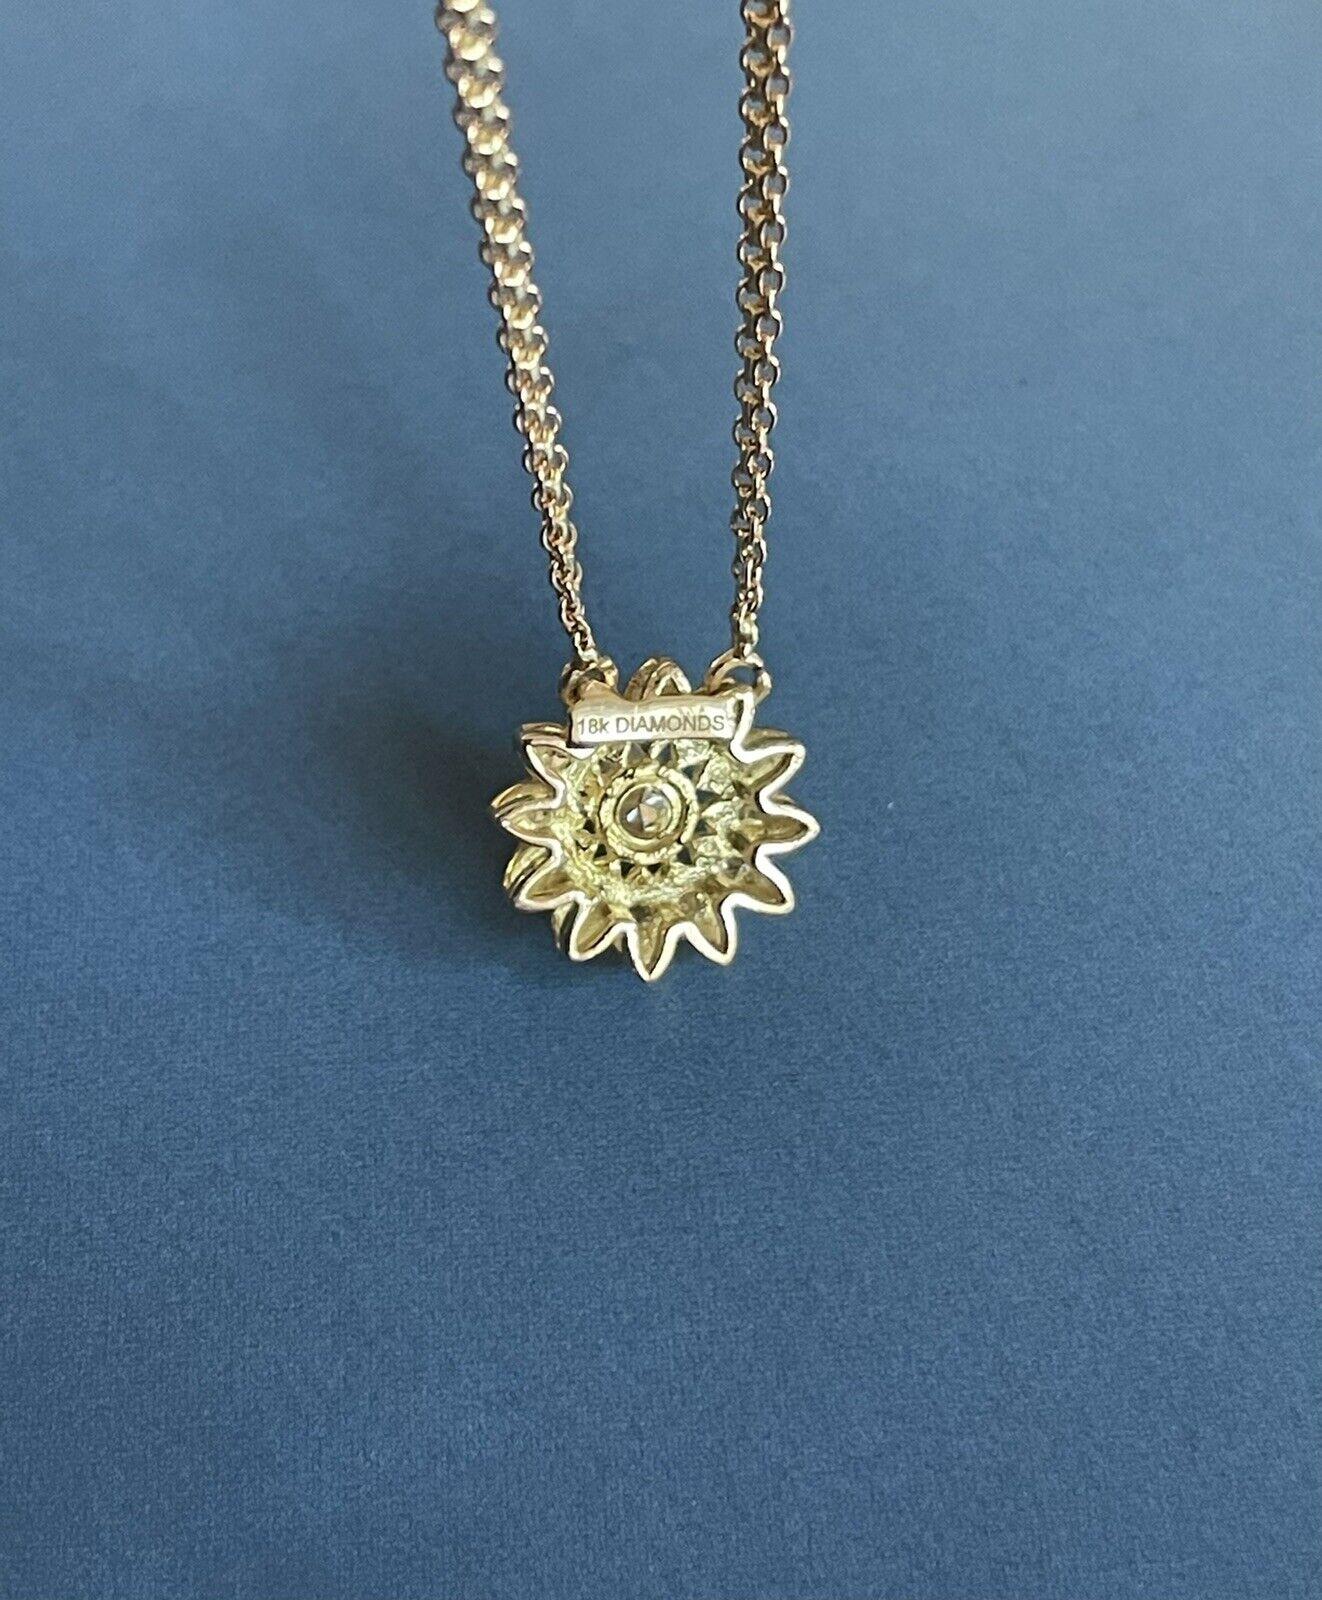 Our Handmade 18ct Gold & Diamond jewellery collection piece straight from heart of London Hatton garden

0.60ct flower pendant set with 4 smaller diamonds 0.05 each in special woven style chain

G/H colour

SI clarity

Chain 18 inches in